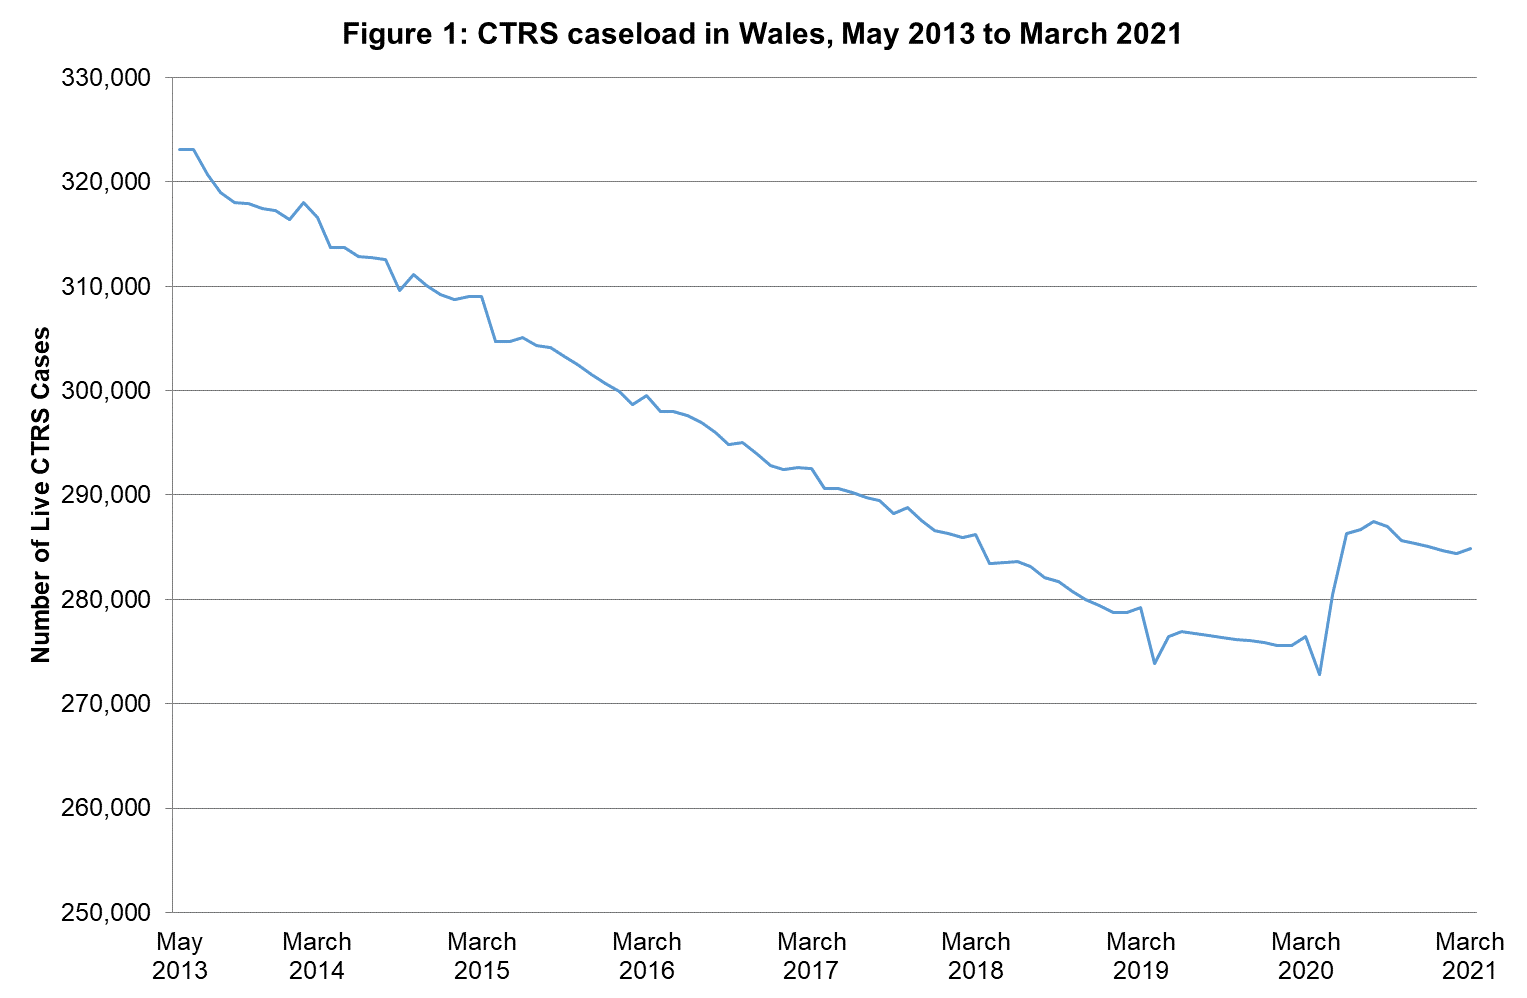 Figure 1 CTRS caseload in Wales, May 2013 to March 2021 shows a gradual fall in cases from over 323,000 in May 2013 down to just over 272,000 in April 2020.  There is then a sharp spike upwards in August 2020 taking cases up to over 287,000 and then falling slightly to nearly 285,000 in March 2021.